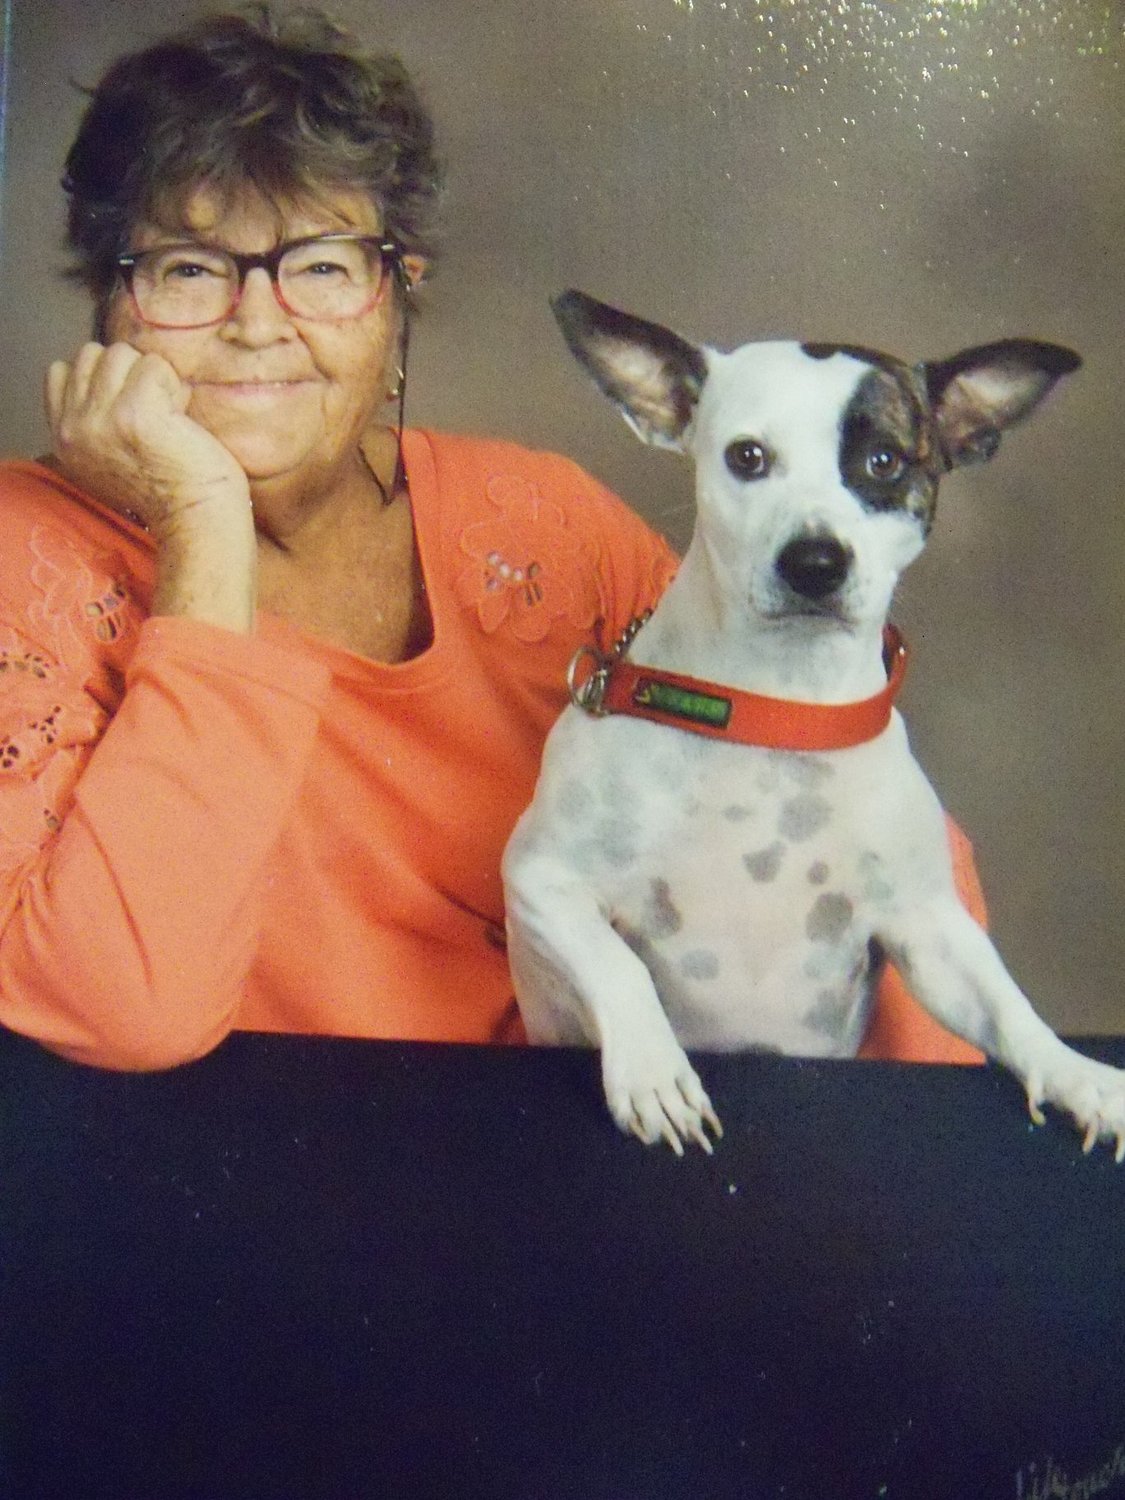 Maryann Erson has been volunteering with K9 Resque since 2014. Here, she is pictured with her own dog.